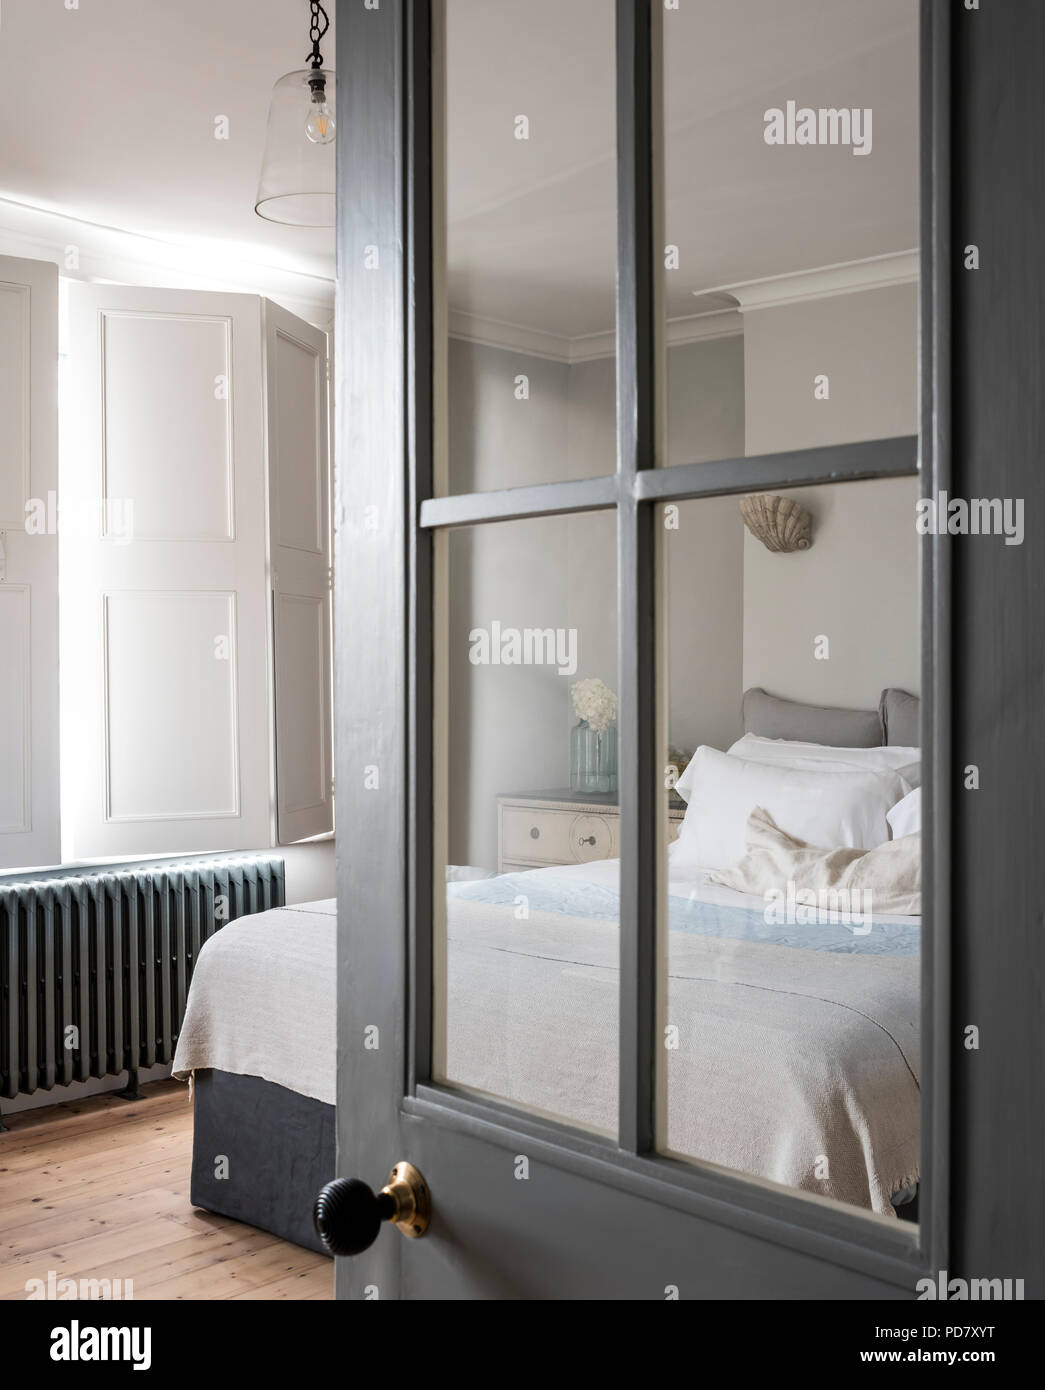 View through glass panelled door into elegant bedroom with window shutters and iron radiator Stock Photo